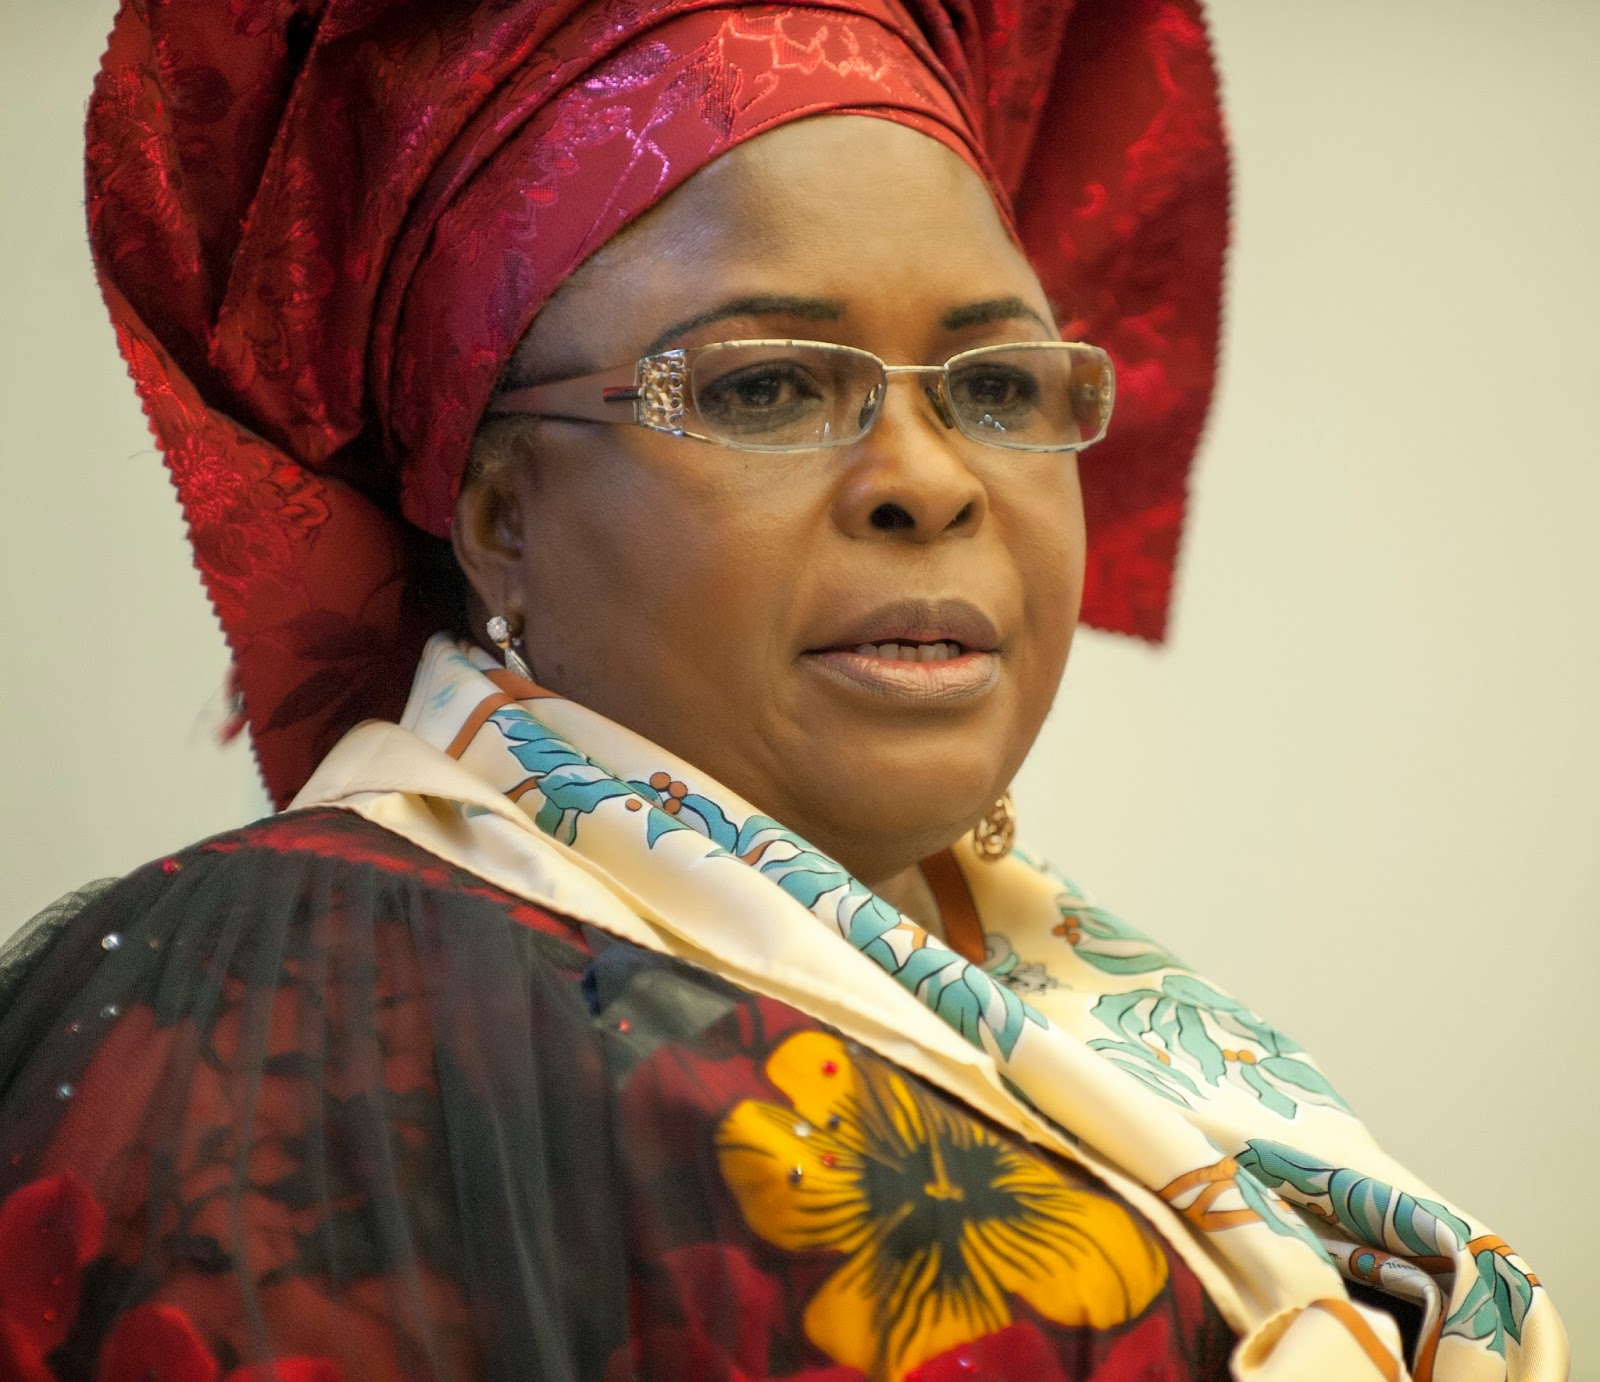 I'm not ready to carry food to my husband inside prison oh - Nigeria's first lady